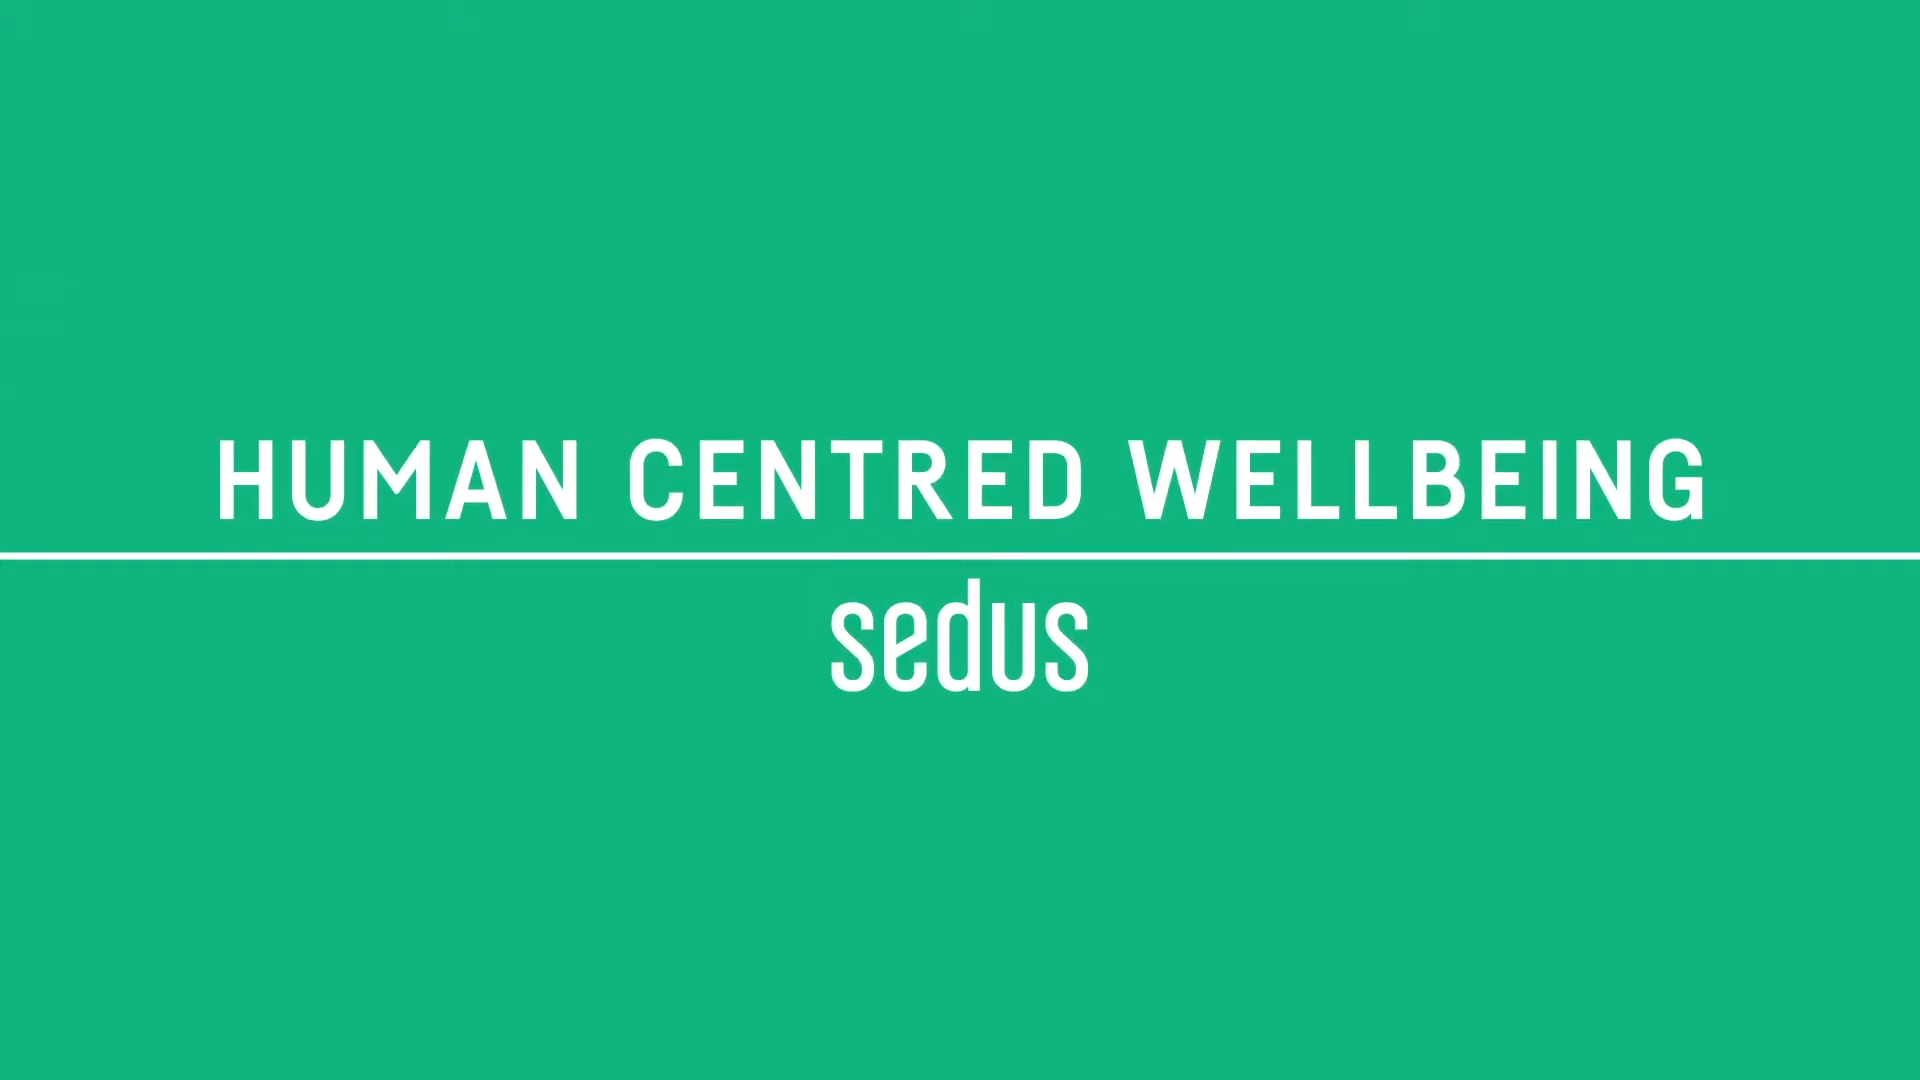 Human-Centred Wellbeing